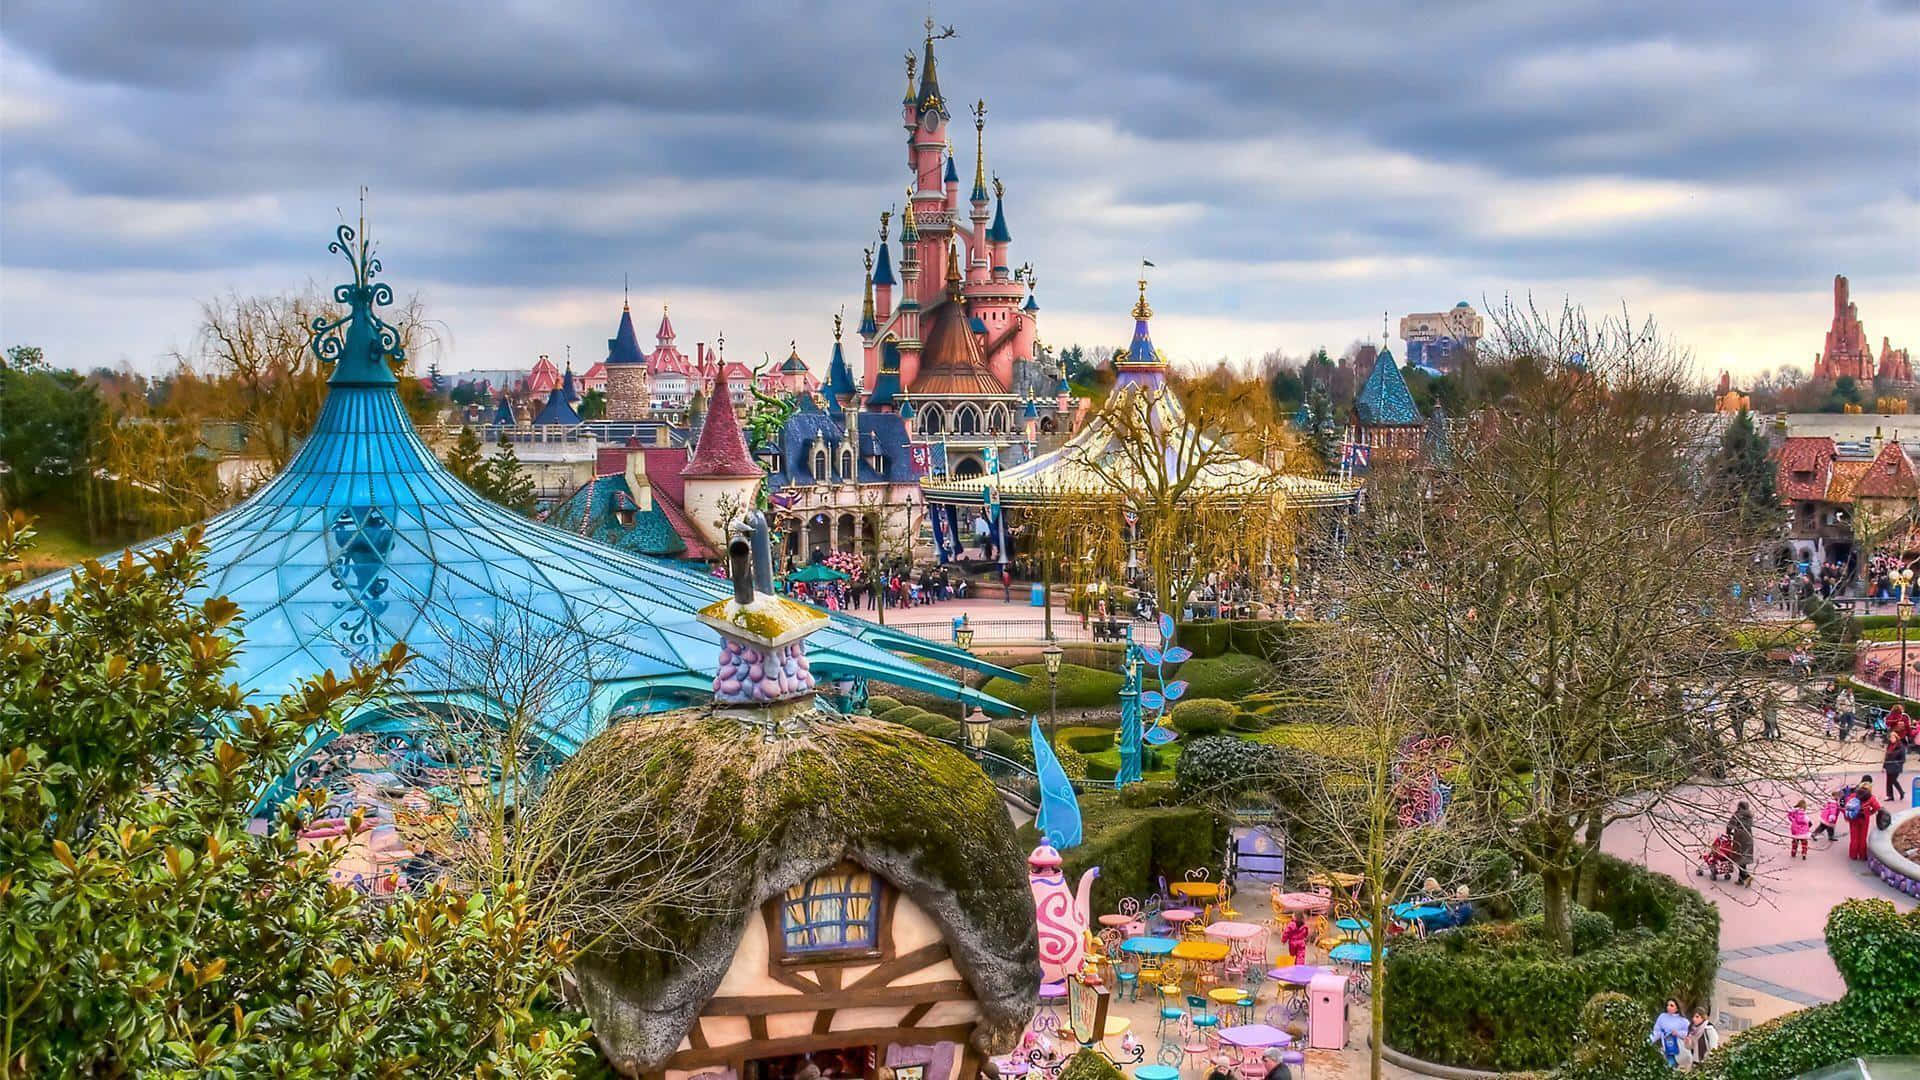 Disneyland Paris - A View Of The Castle And The Park